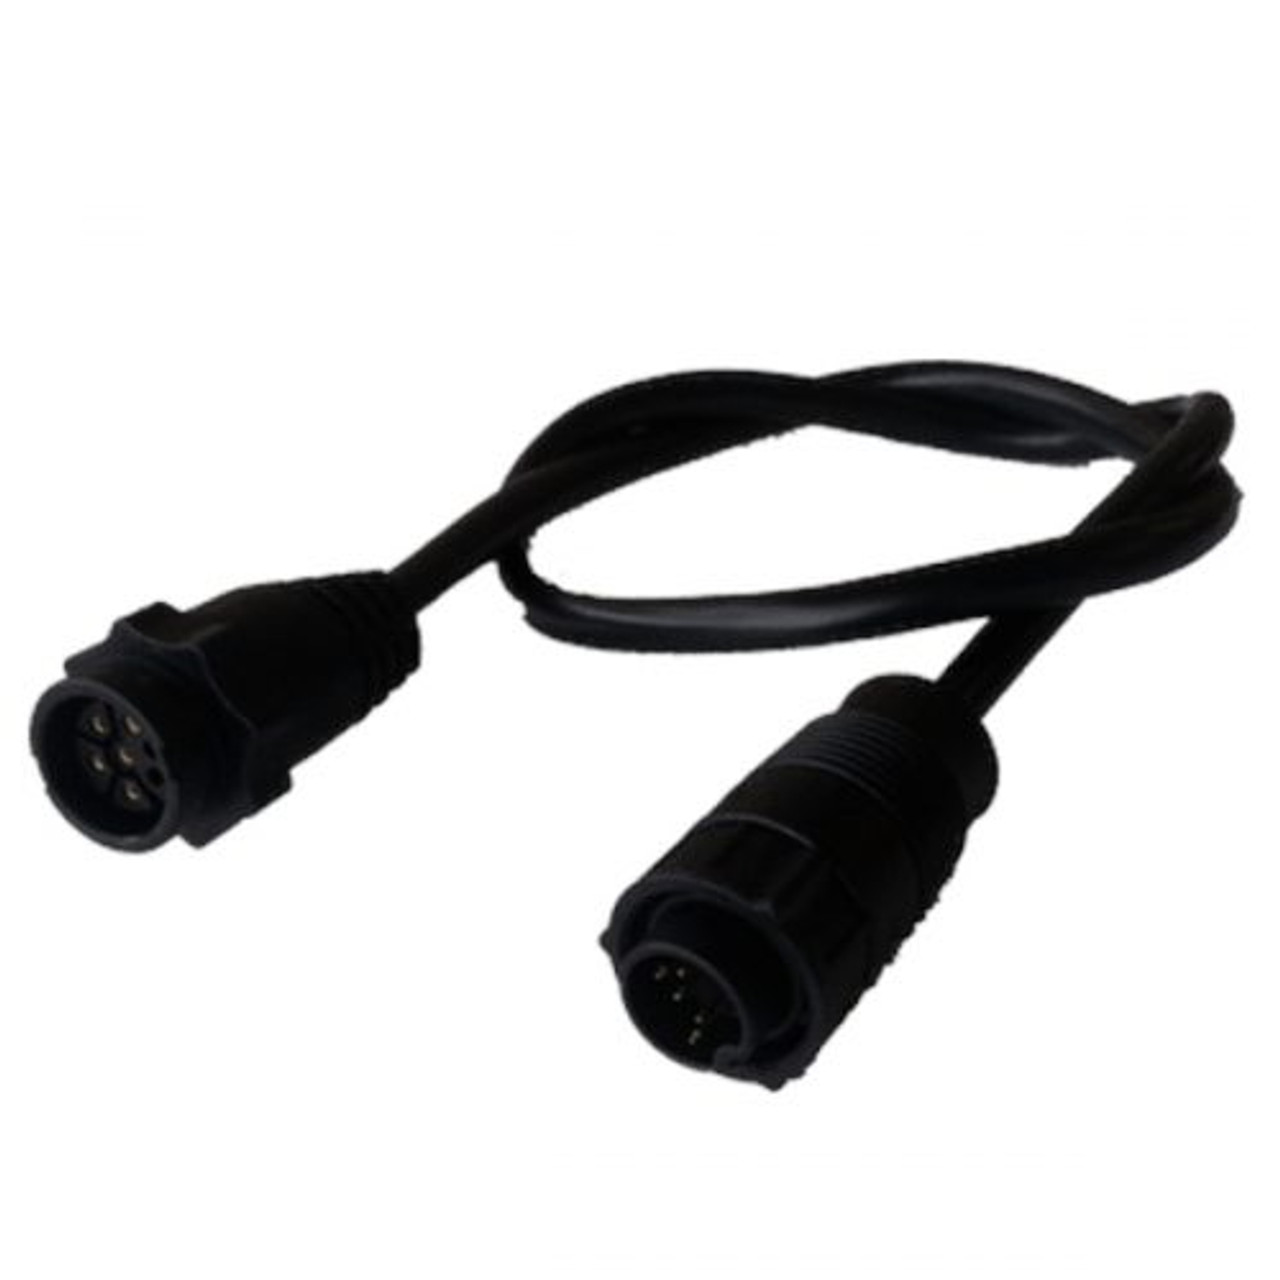 https://cdn11.bigcommerce.com/s-juamt7rae6/images/stencil/1280x1280/products/2171/2716/lowrance-7-pin-to-9-pin-xsonic-transducer-cable-e1522106986165__41286.1626800575.jpg?c=1?imbypass=on